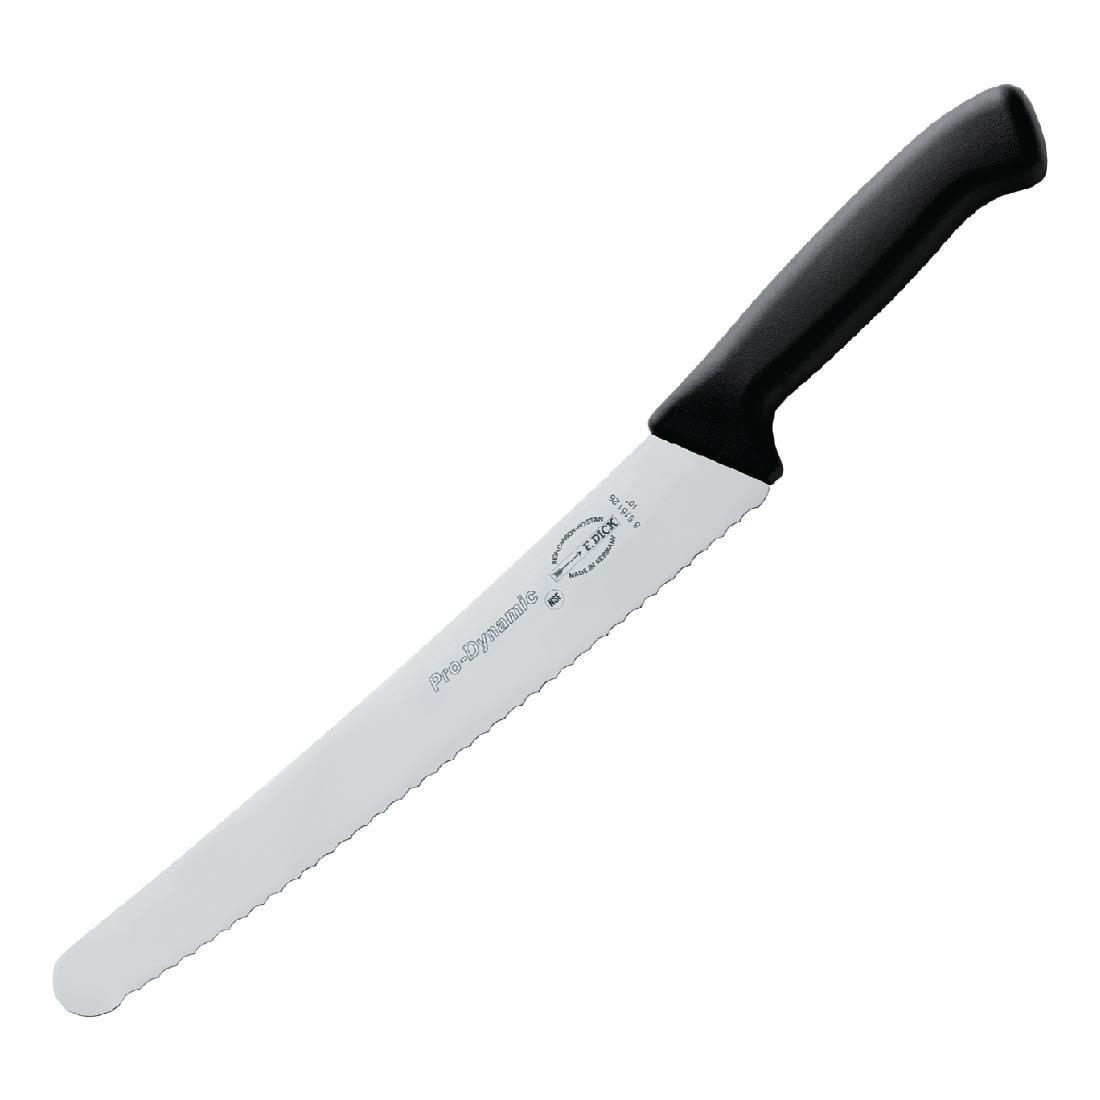 Dick Pro Dynamic HACCP Serrated Pastry Knife Black 25.5cm - DL377  - 1